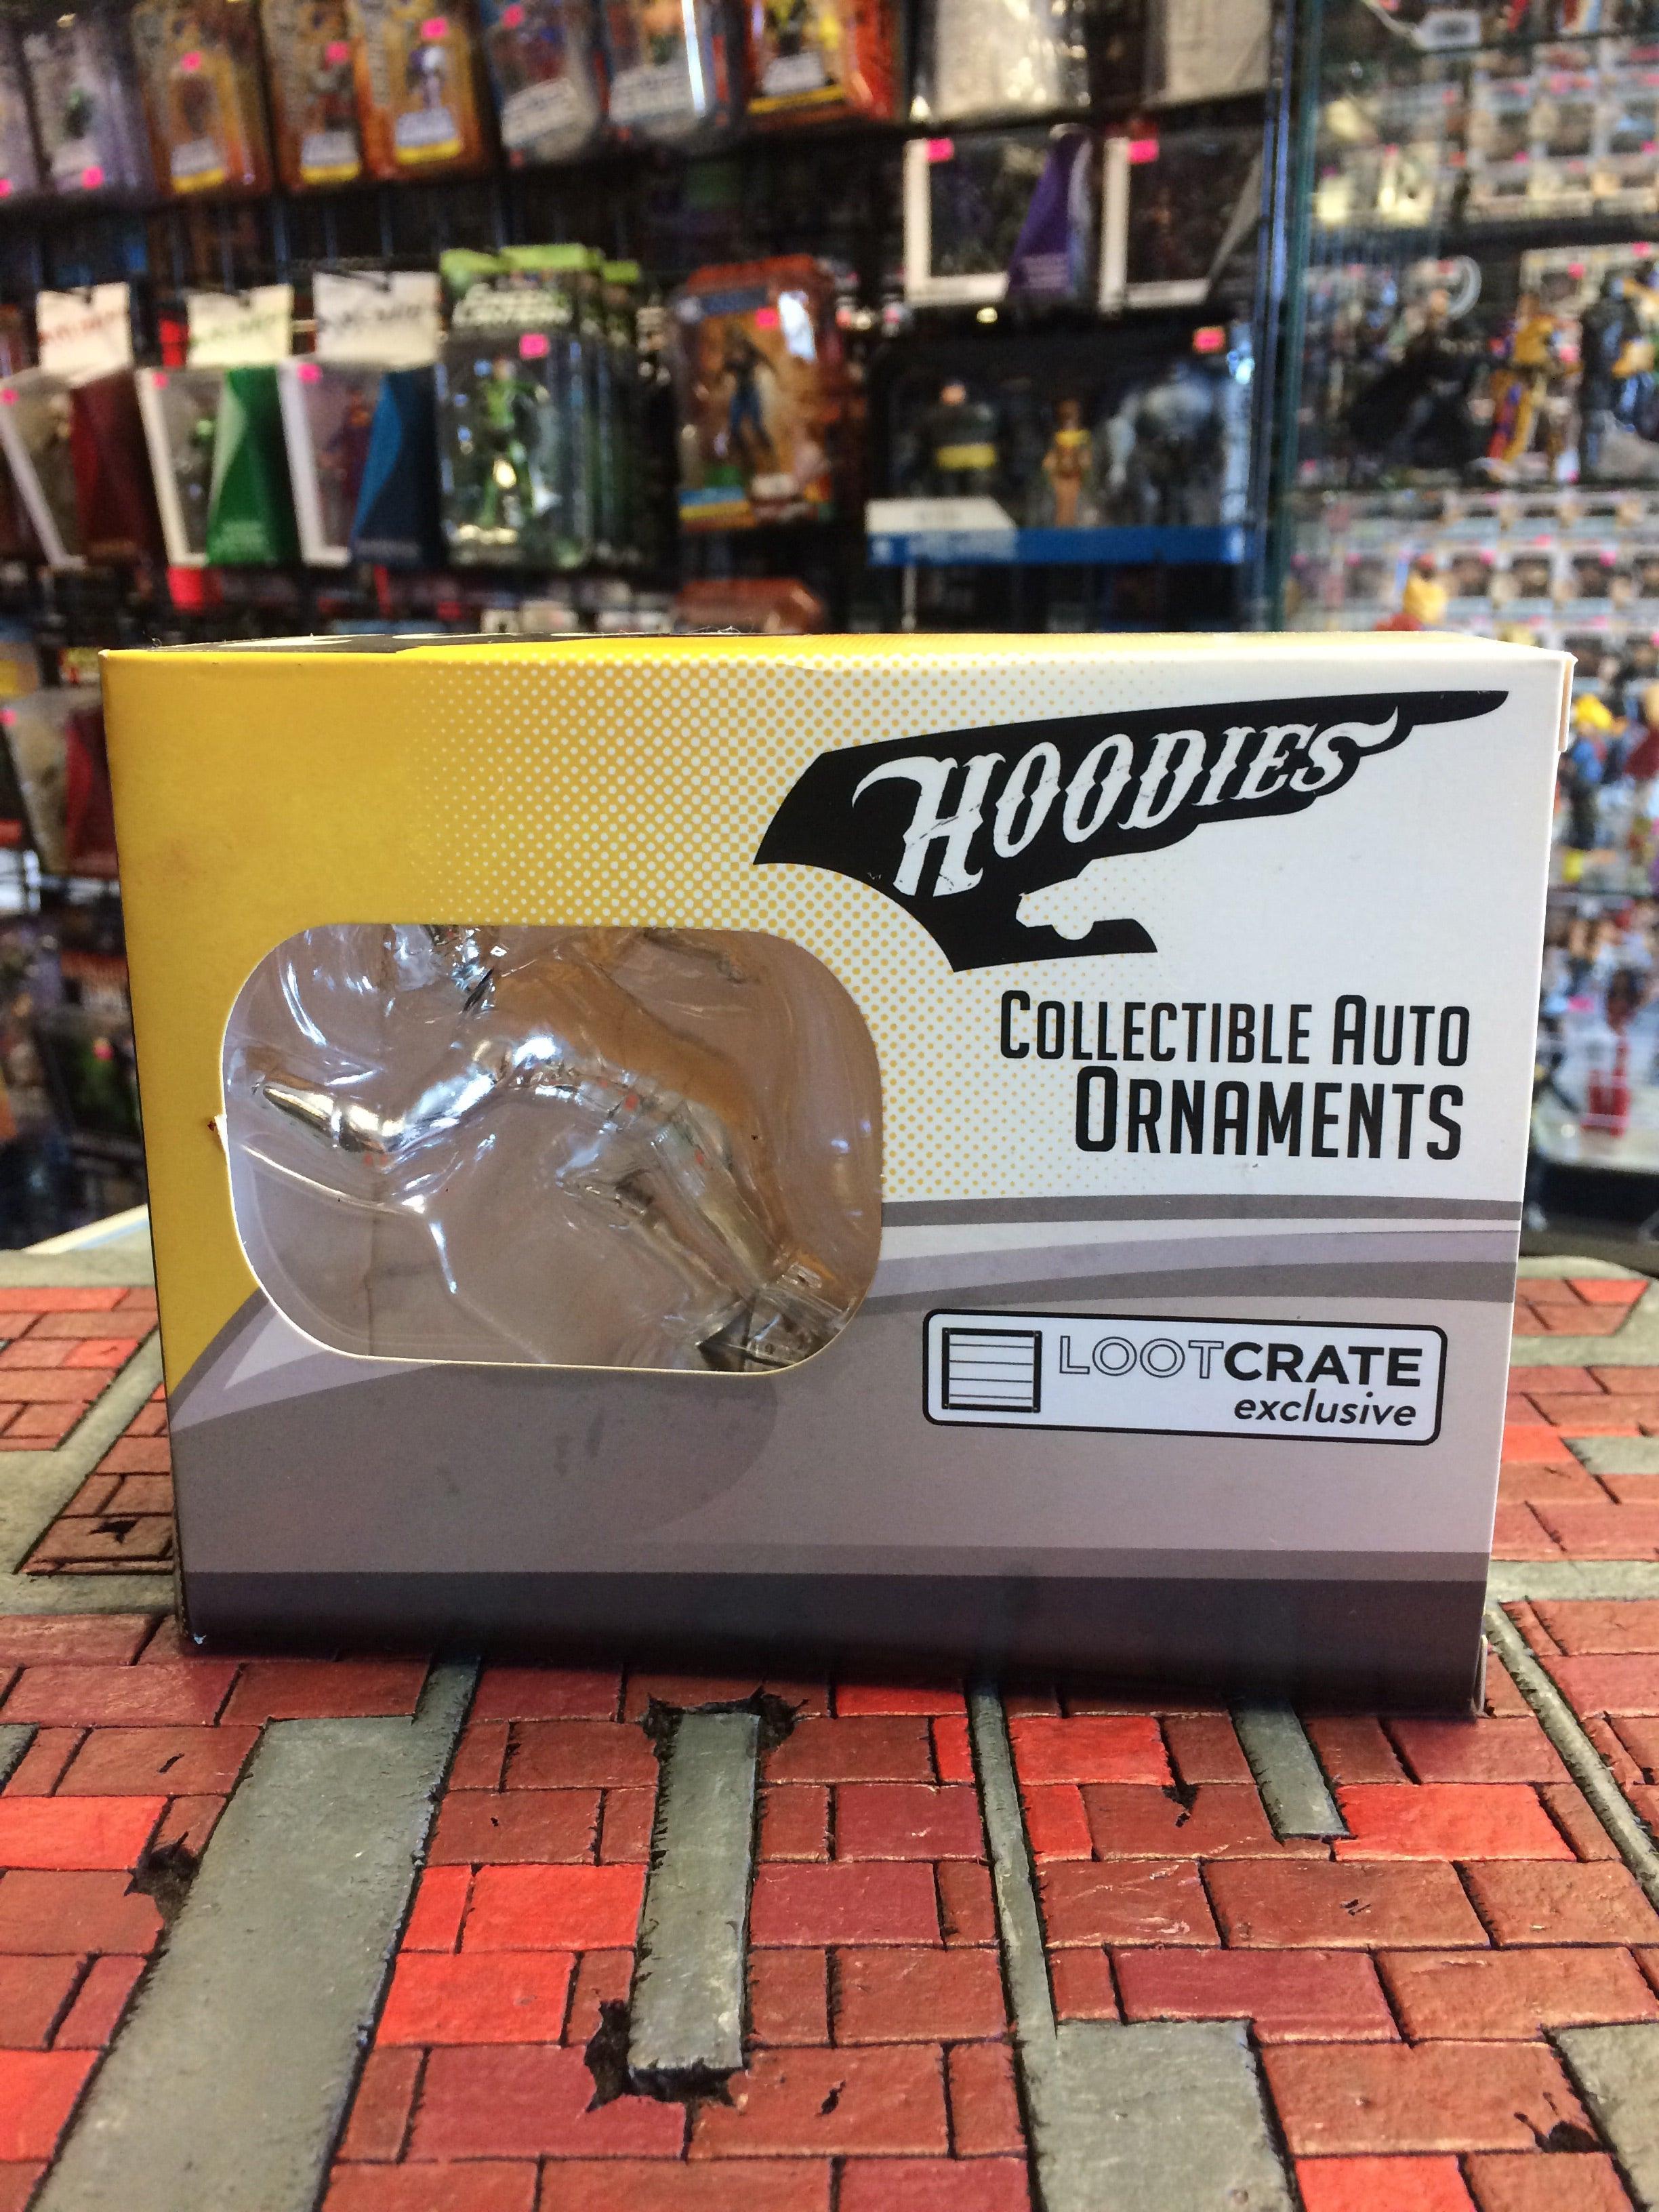 Hoodies Lootcrate exclusive The Flash Auto Ornament - Rogue Toys